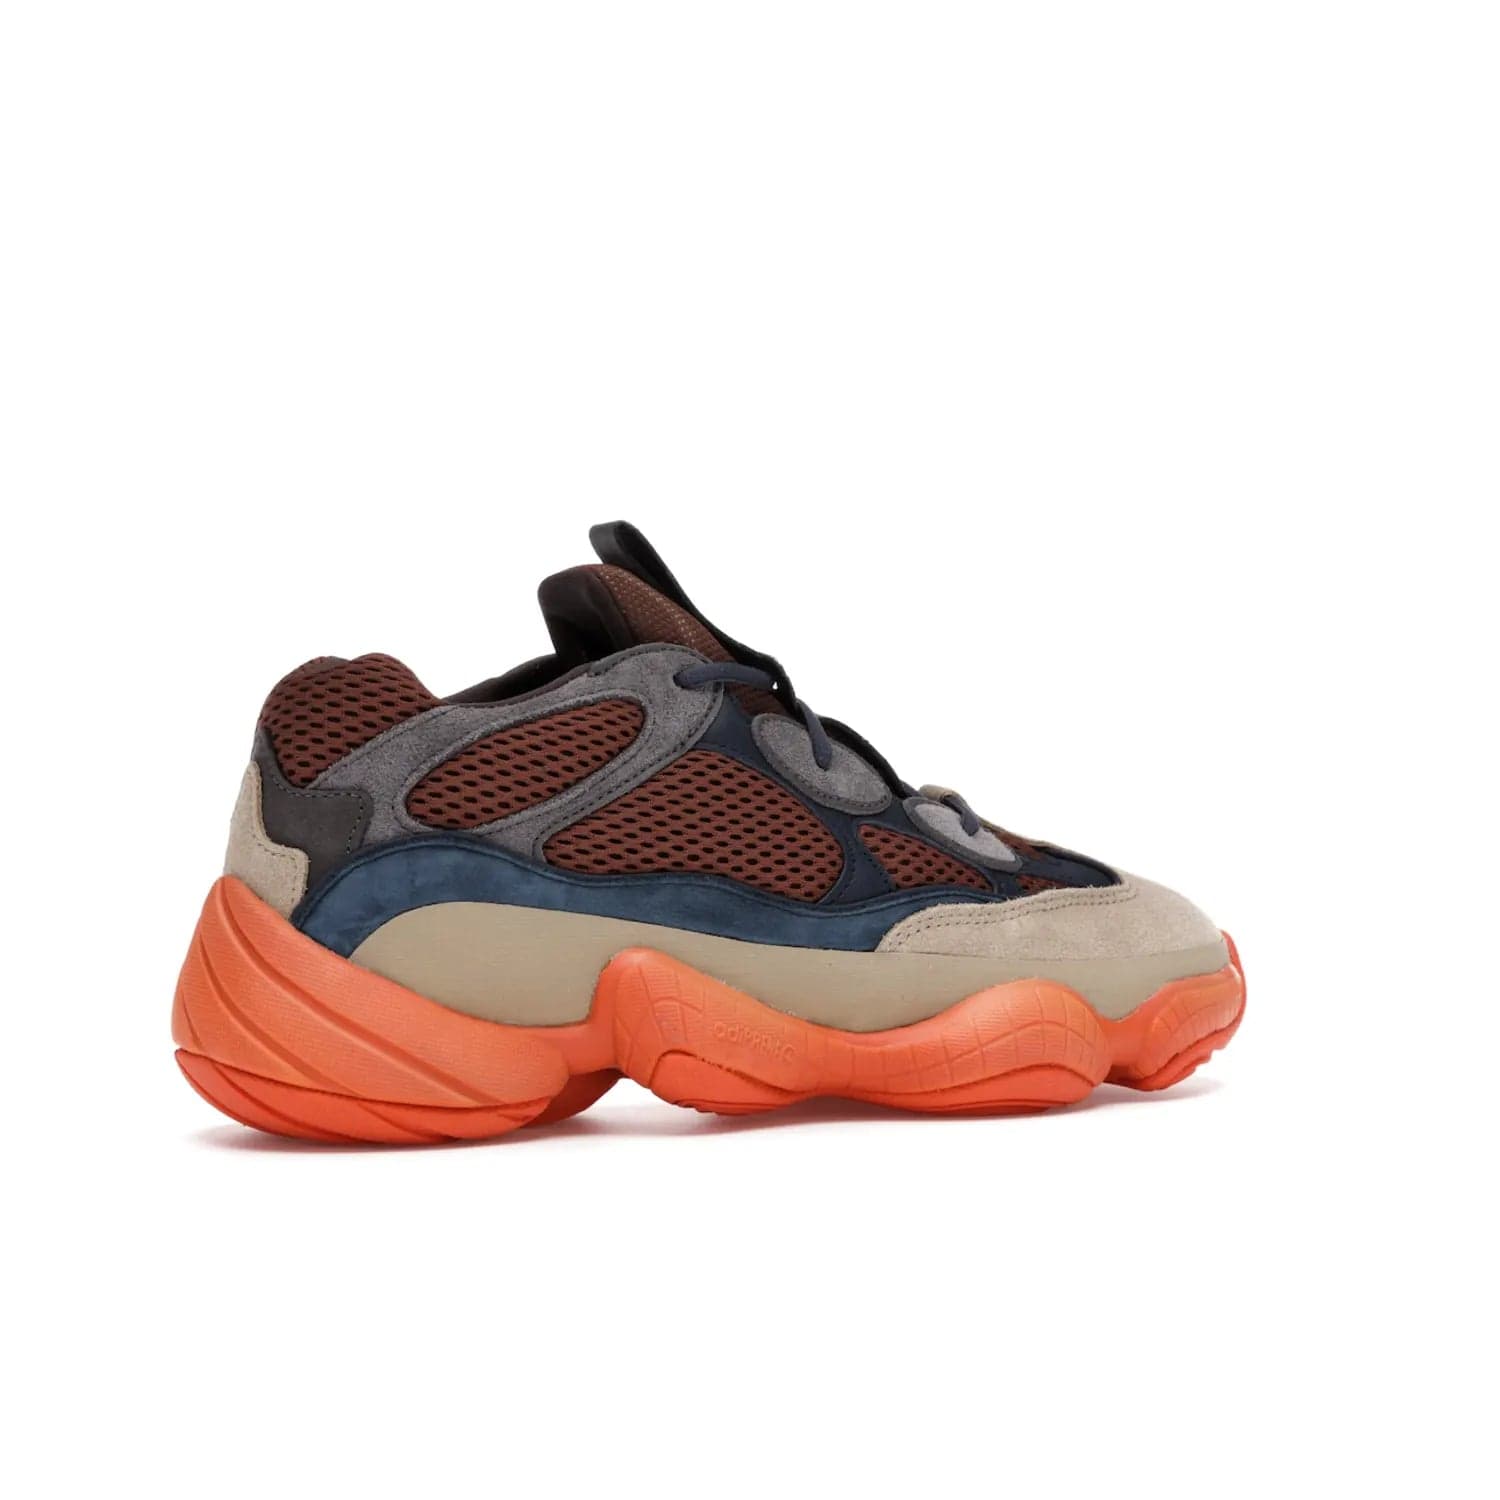 adidas Yeezy 500 Enflame - Image 34 - Only at www.BallersClubKickz.com - Step into style with the adidas Yeezy 500 Enflame. Mix of mesh, leather, and suede layered together to create tonal-brown, dark blue, & orange. Orange AdiPRENE sole provides superior cushioning & comfort. Get yours and experience maximum style.